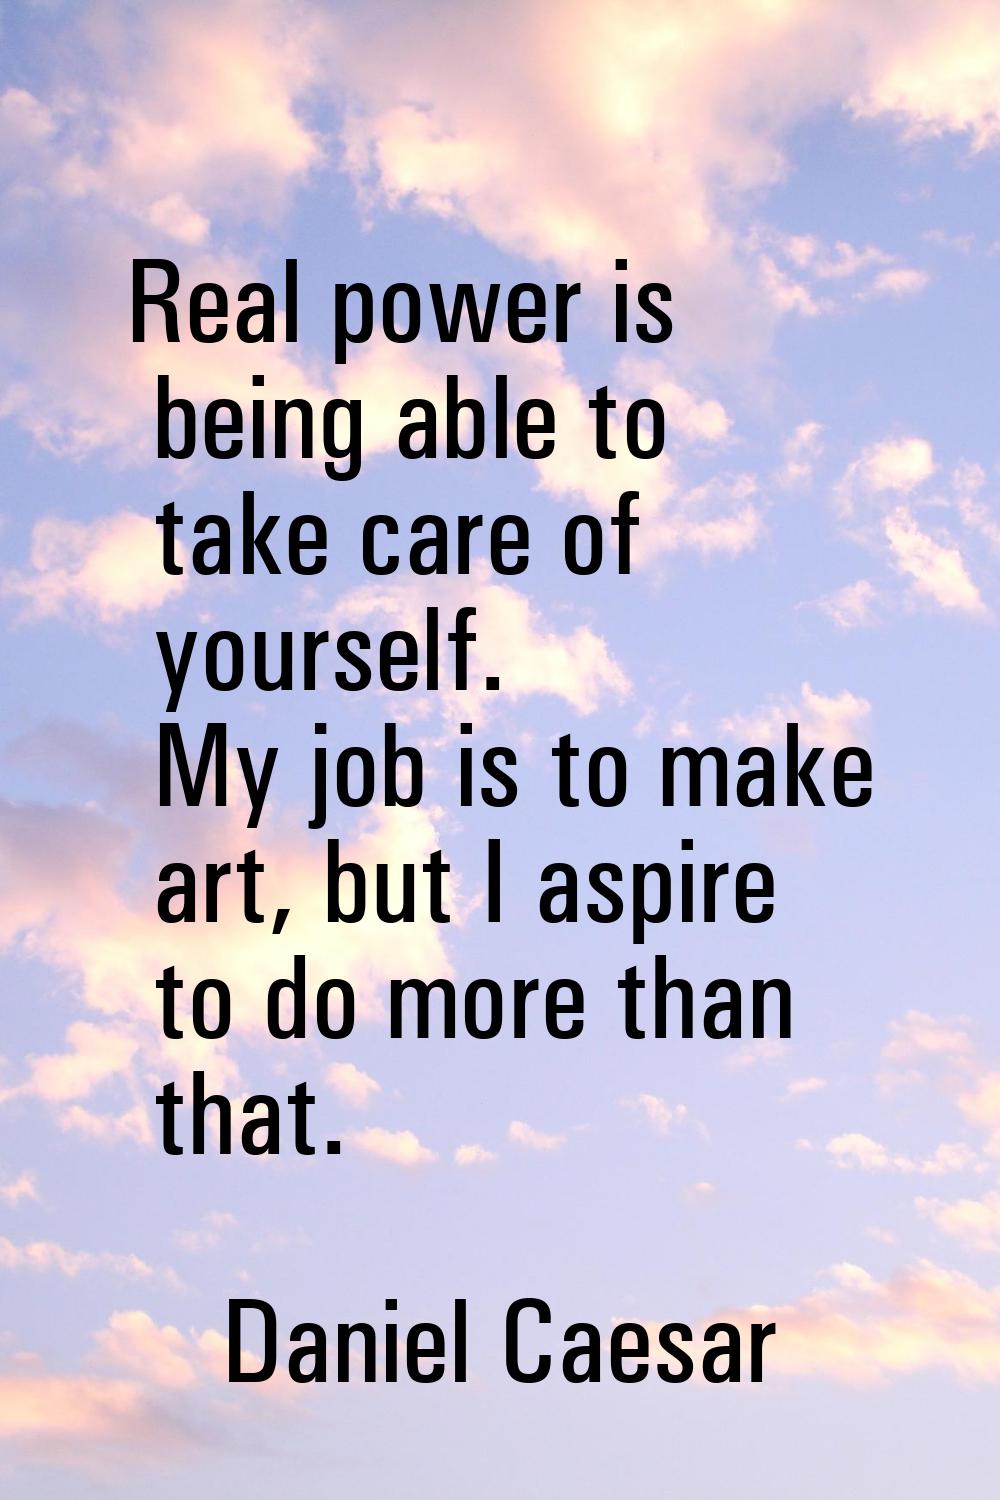 Real power is being able to take care of yourself. My job is to make art, but I aspire to do more t